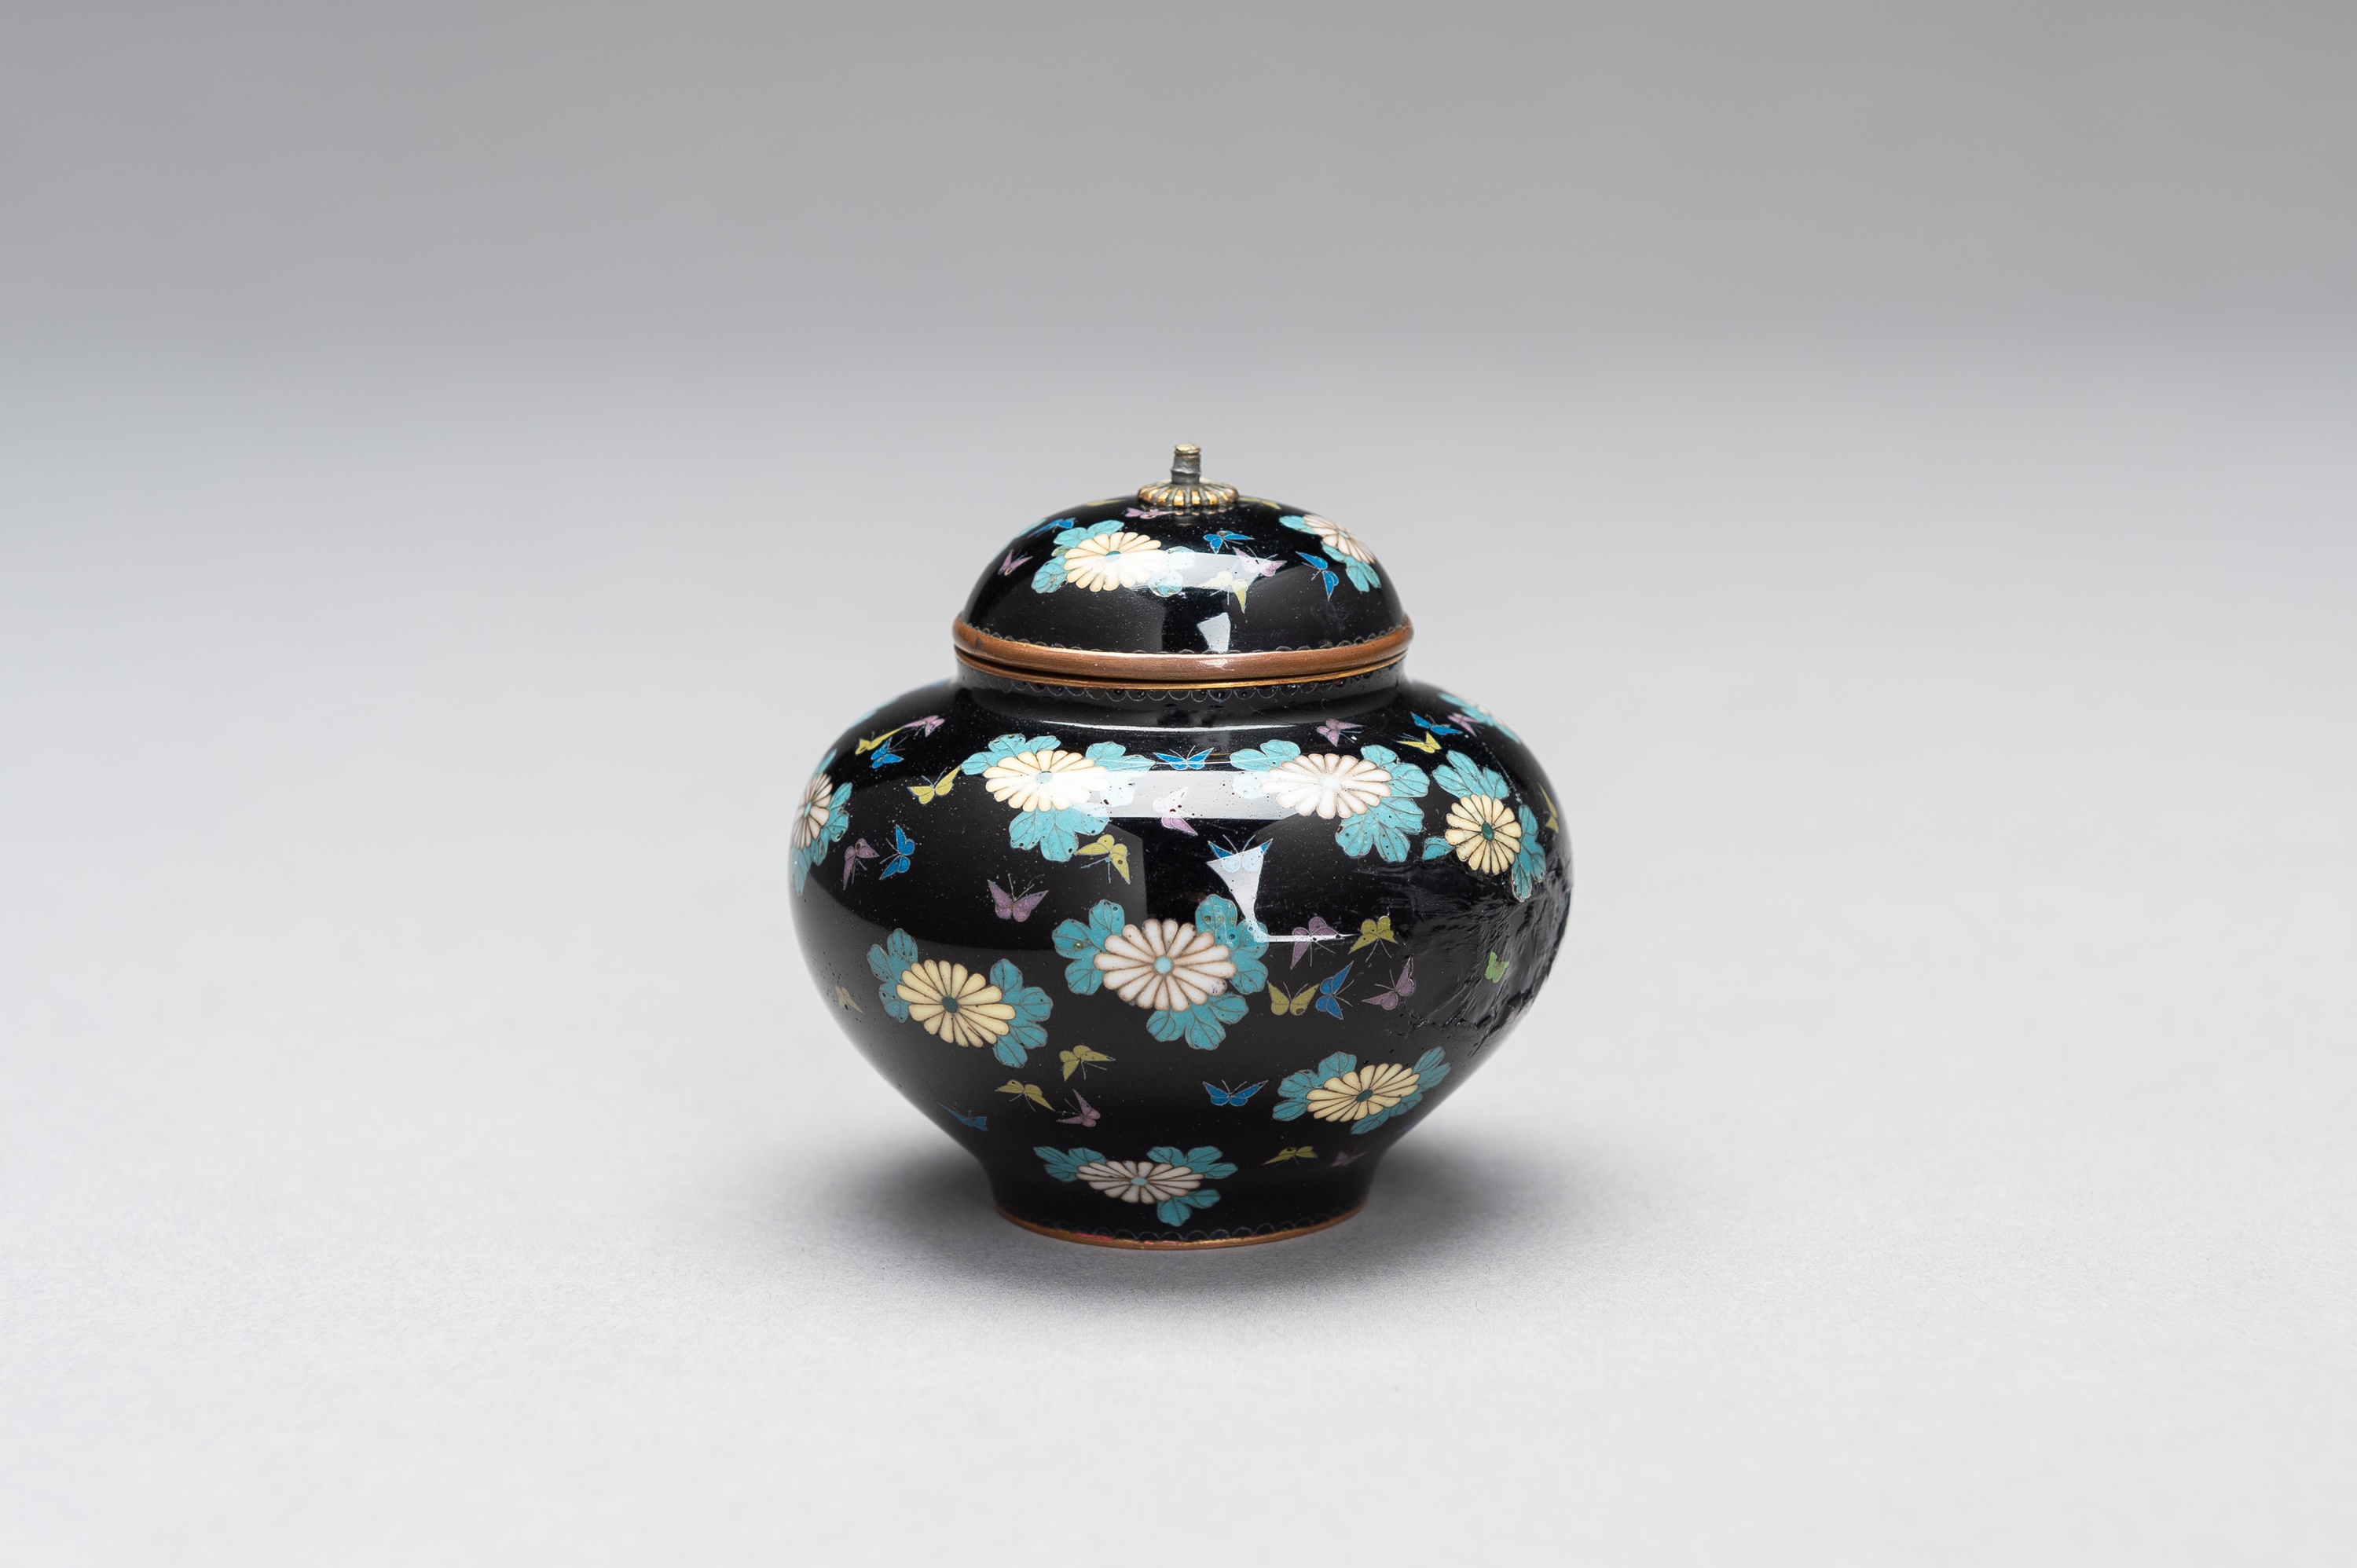 A CLOISONNE ENAMEL MINIATURE VASE WITH COVER - Image 3 of 9